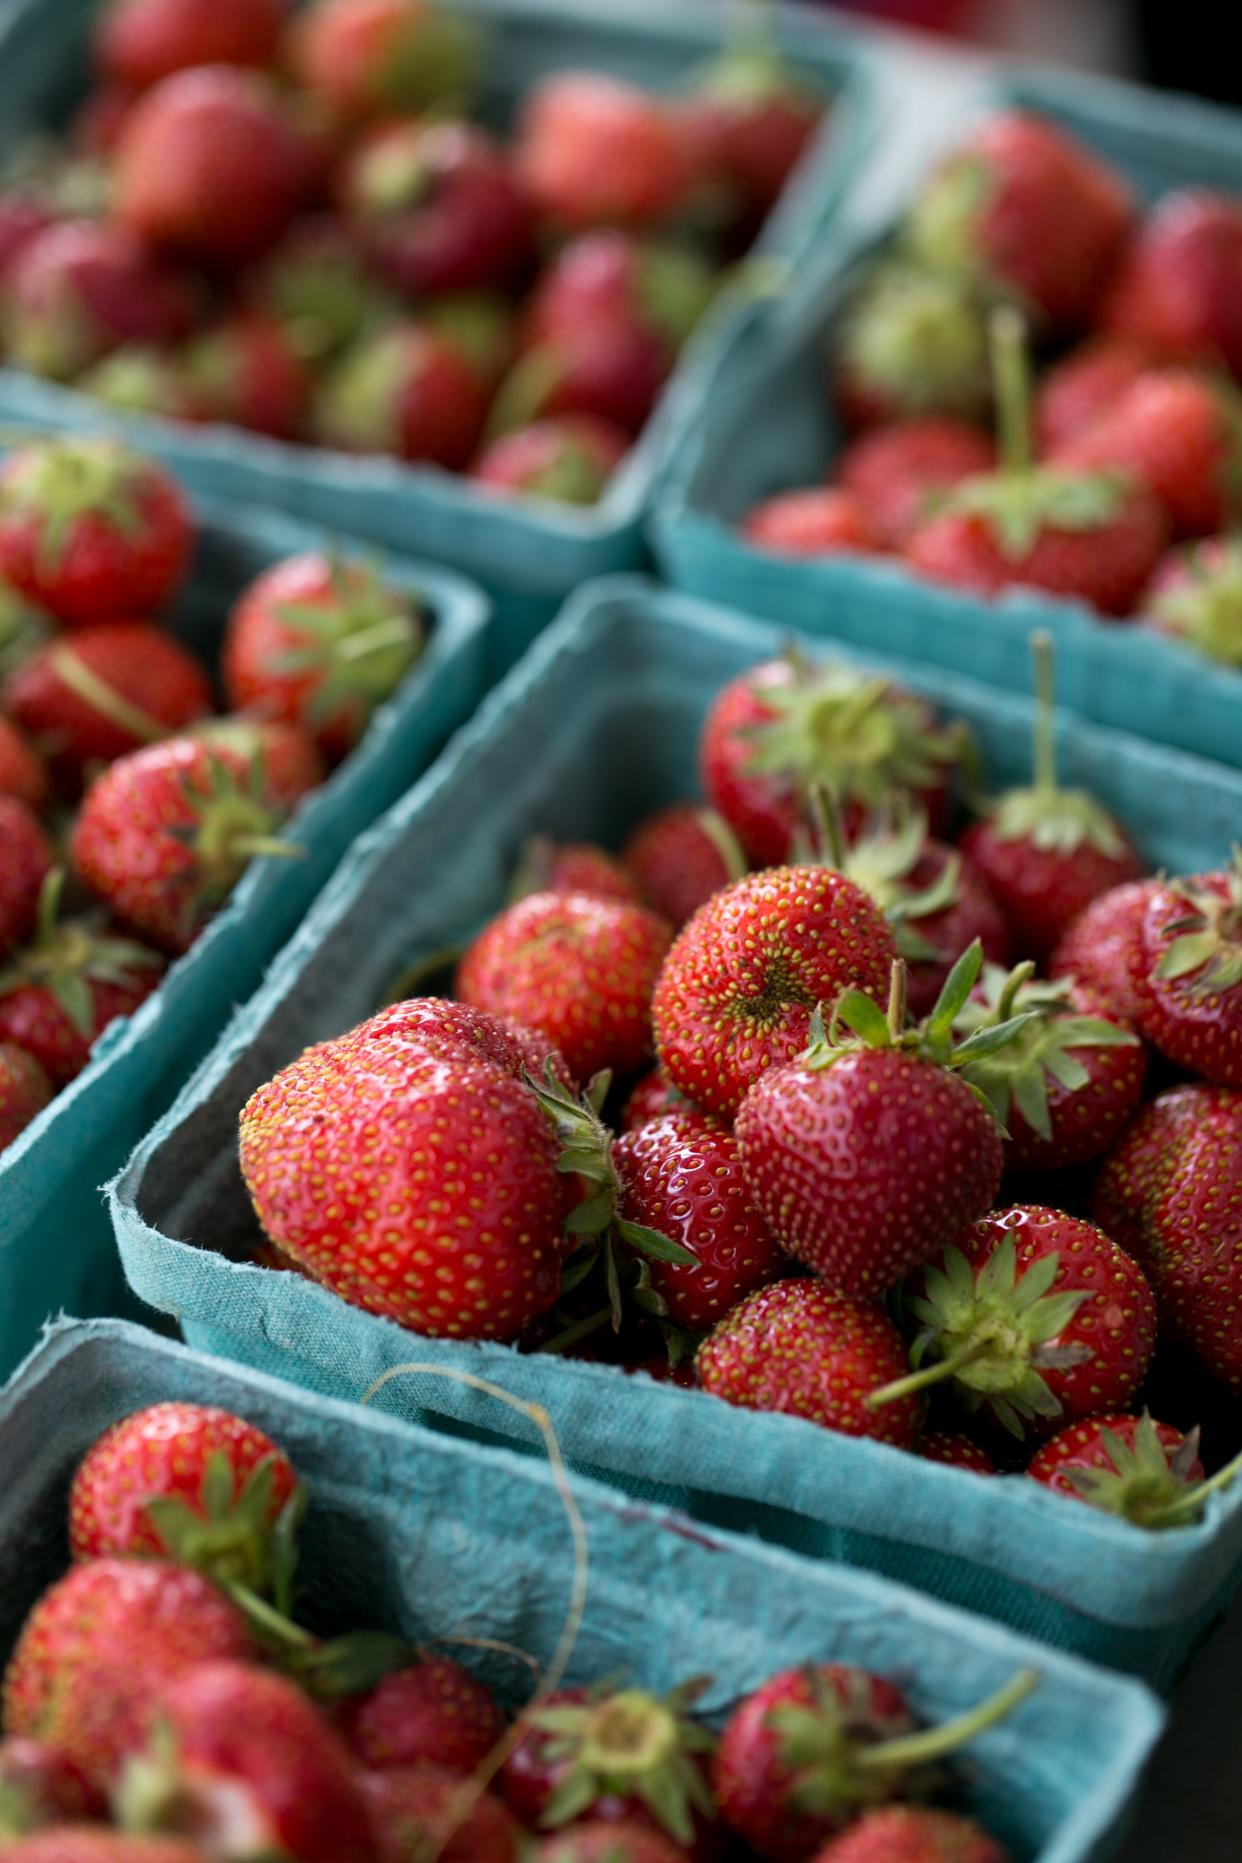 Strawberries for sale at the Jeffersonville Farmers Market in Jeffersonville, Ind. May 30, 2015.